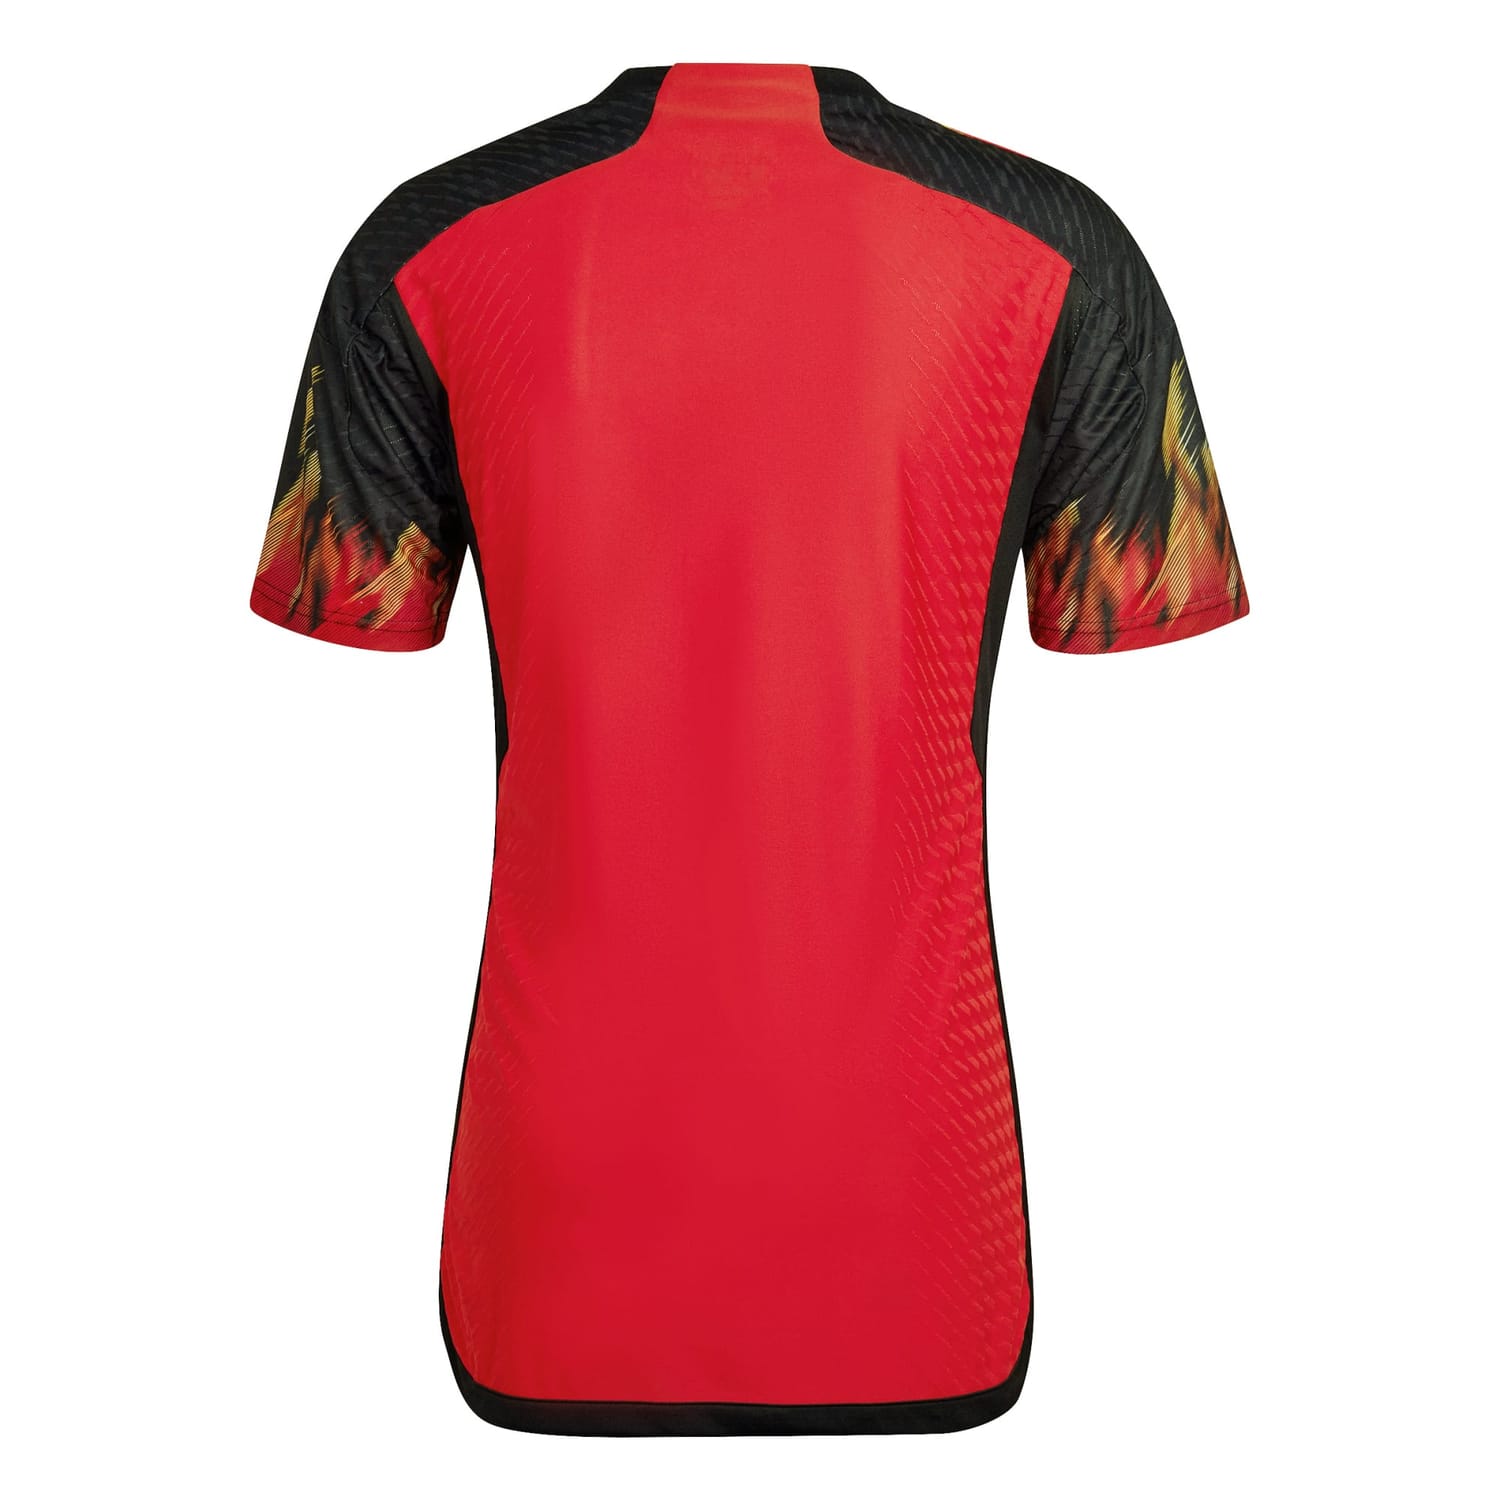 Belgium National Team Home Authentic Jersey Shirt Red 2022-23 for Men